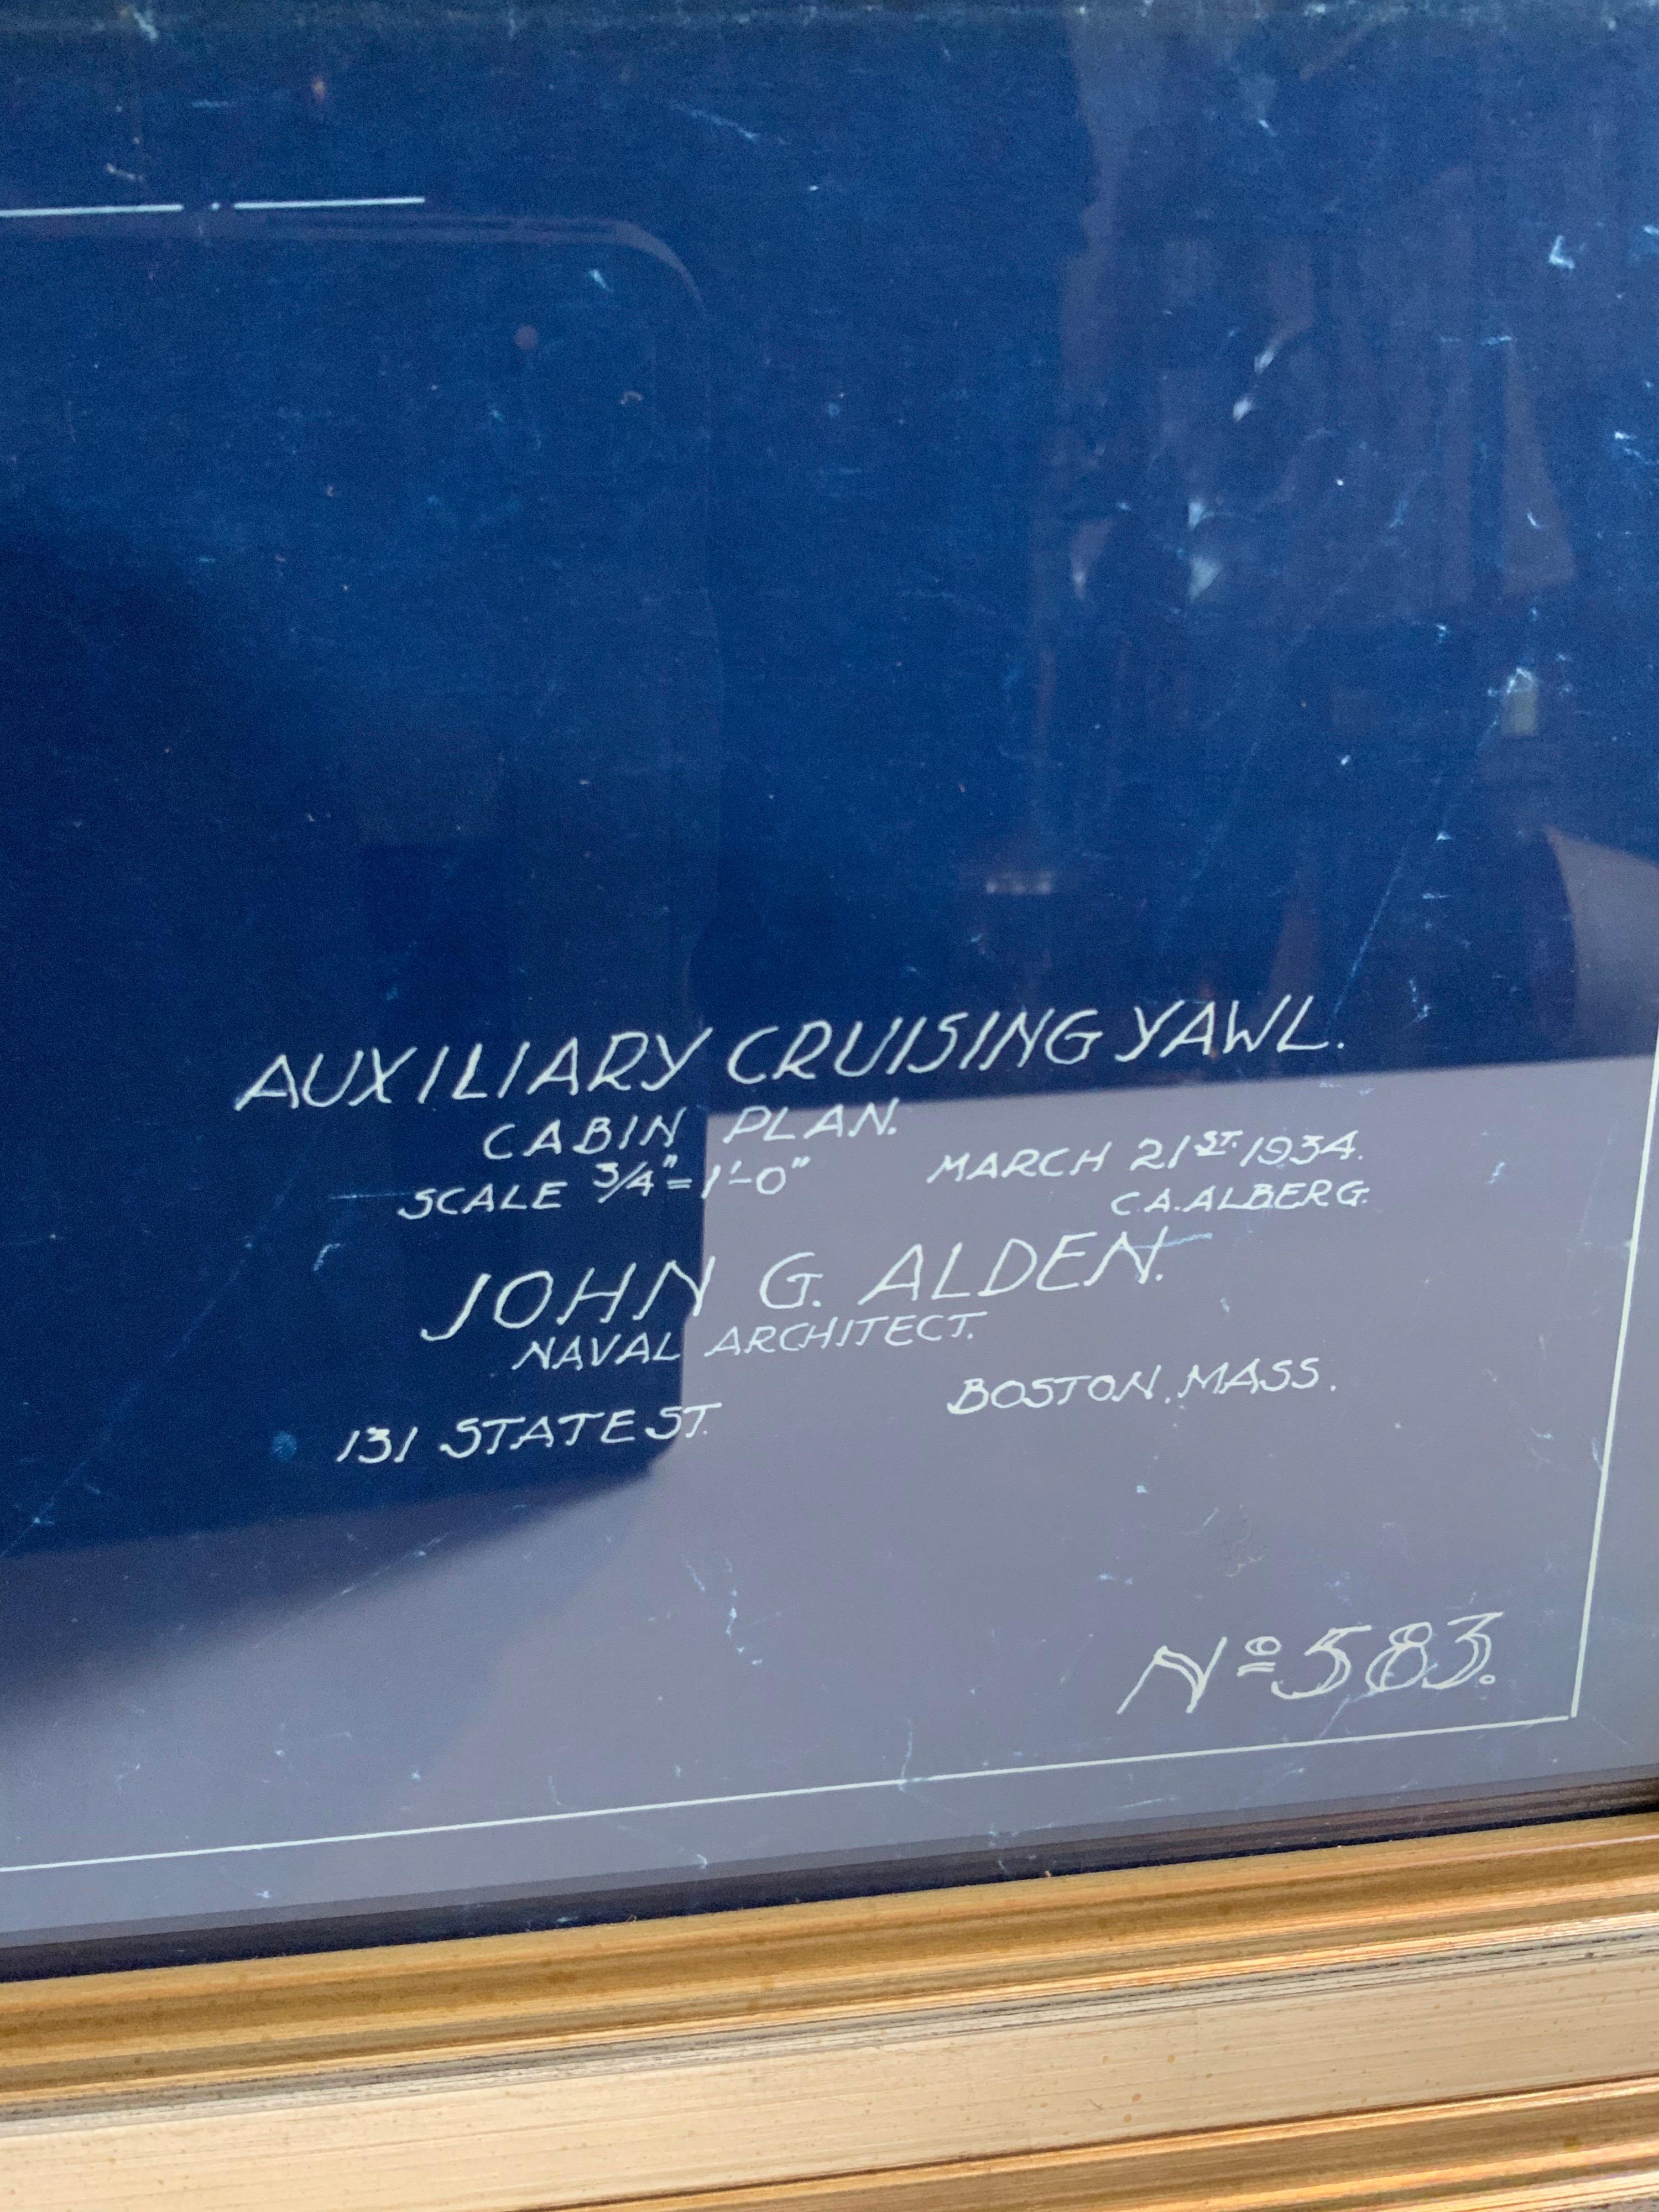 Paper John Alden Blueprint No. 583 of an Auxiliary Cruising Yawl For Sale